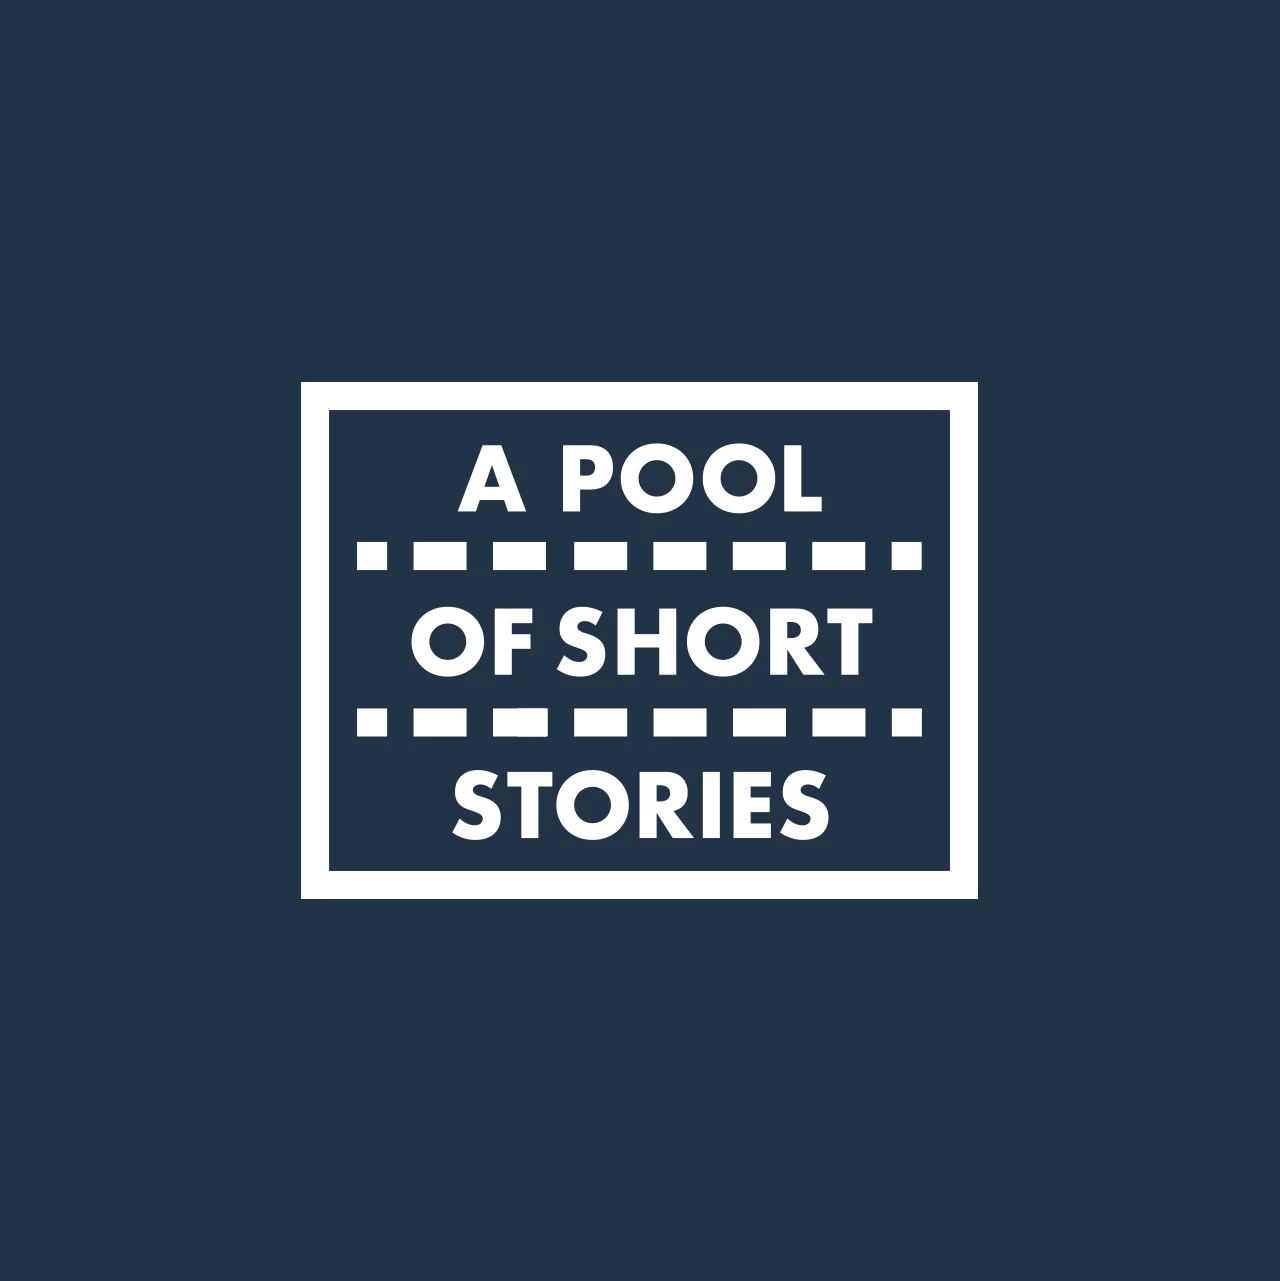 A Pool of Short Stories